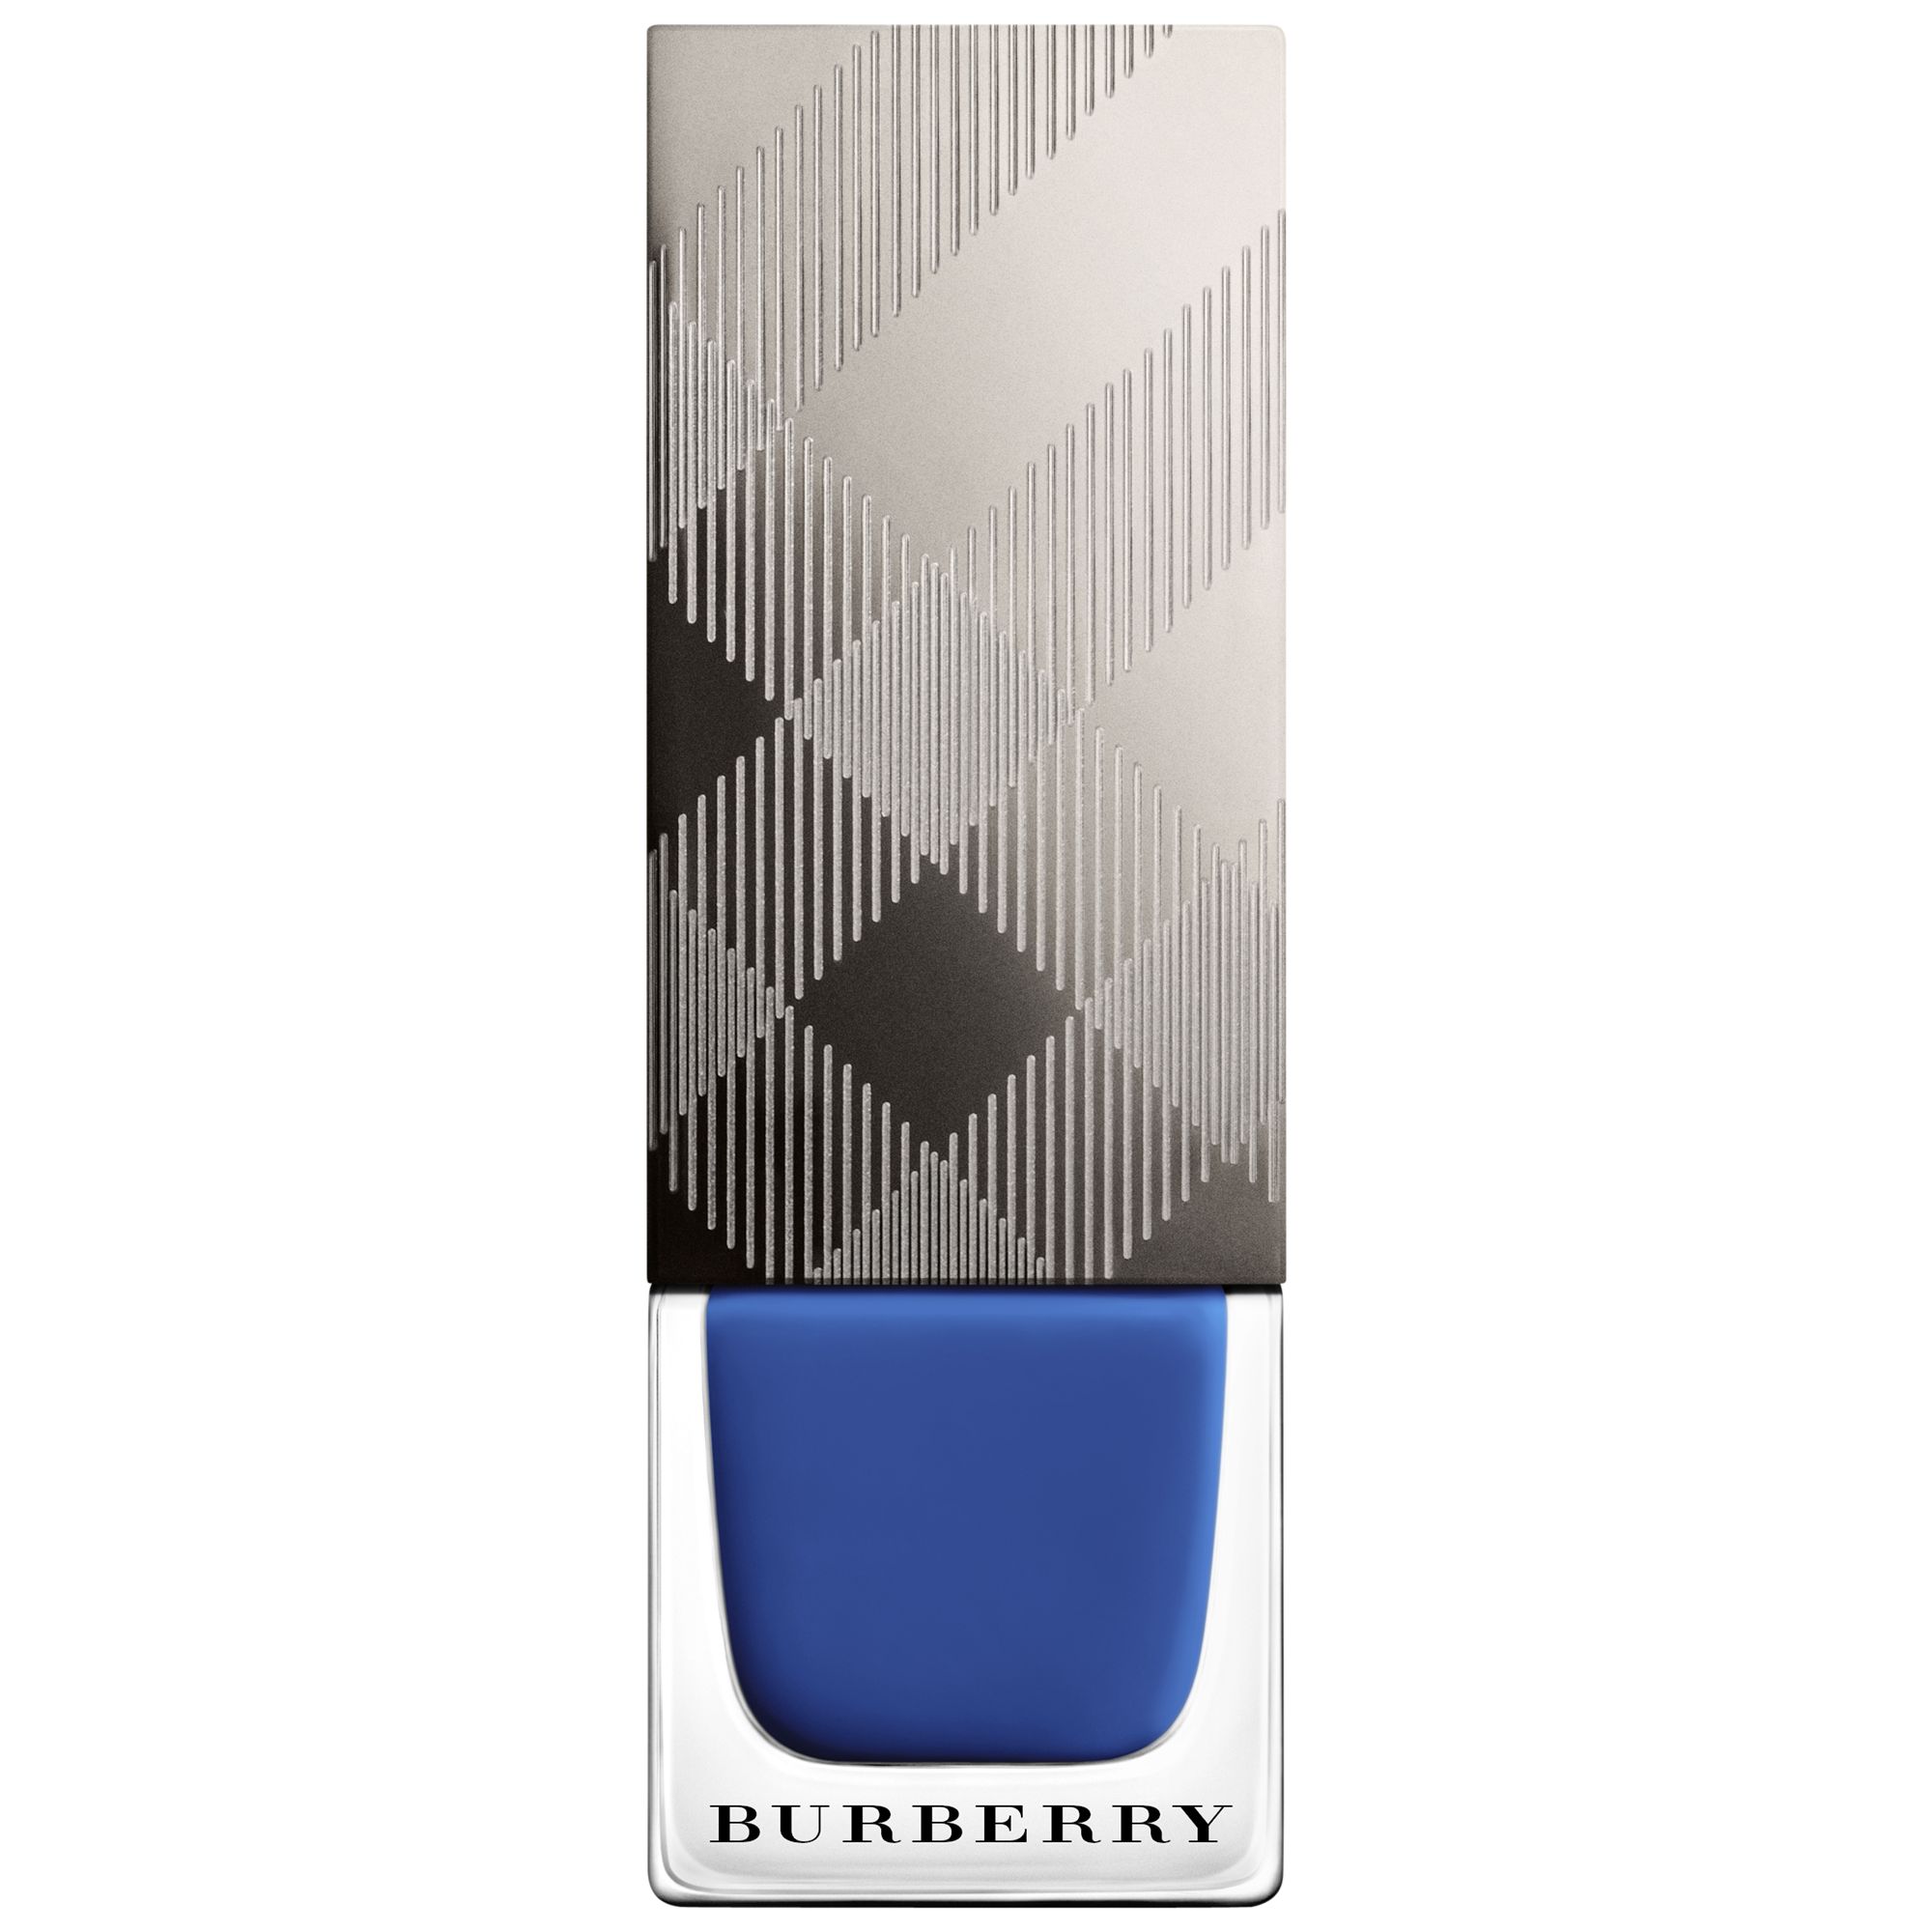 shop for Burberry Beauty Nail Polish - S/S15 Runway Collection at Shopo